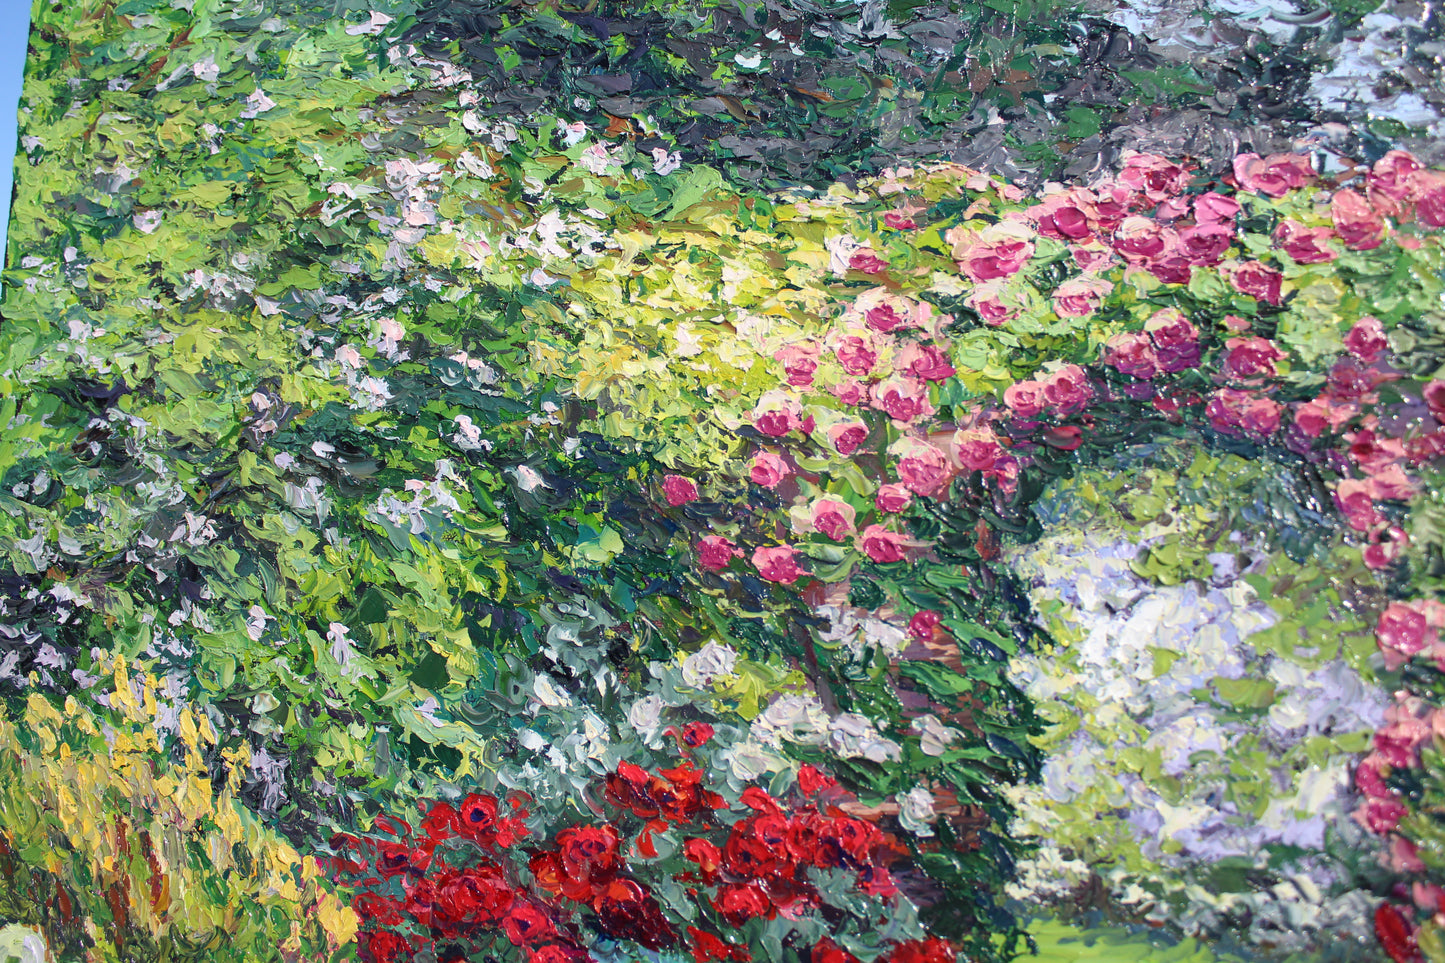 French Country Garden, Original 36 x 30 Oil On Canvas